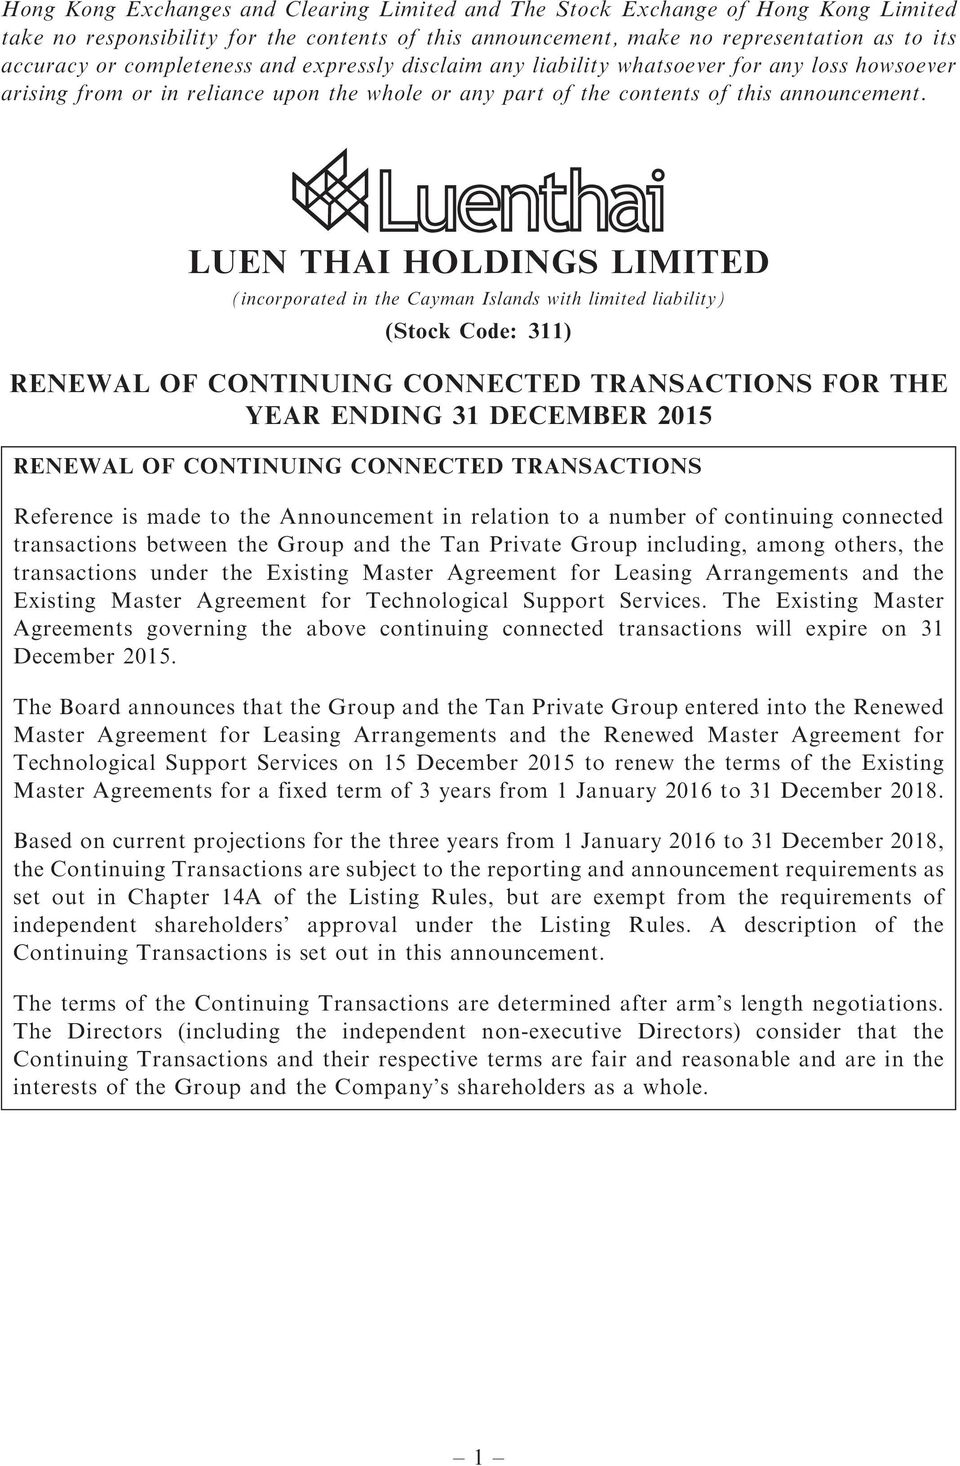 LUEN THAI HOLDINGS LIMITED (incorporated in the Cayman Islands with limited liability) (Stock Code: 311) RENEWAL OF CONTINUING CONNECTED TRANSACTIONS FOR THE YEAR ENDING 31 DECEMBER 2015 RENEWAL OF